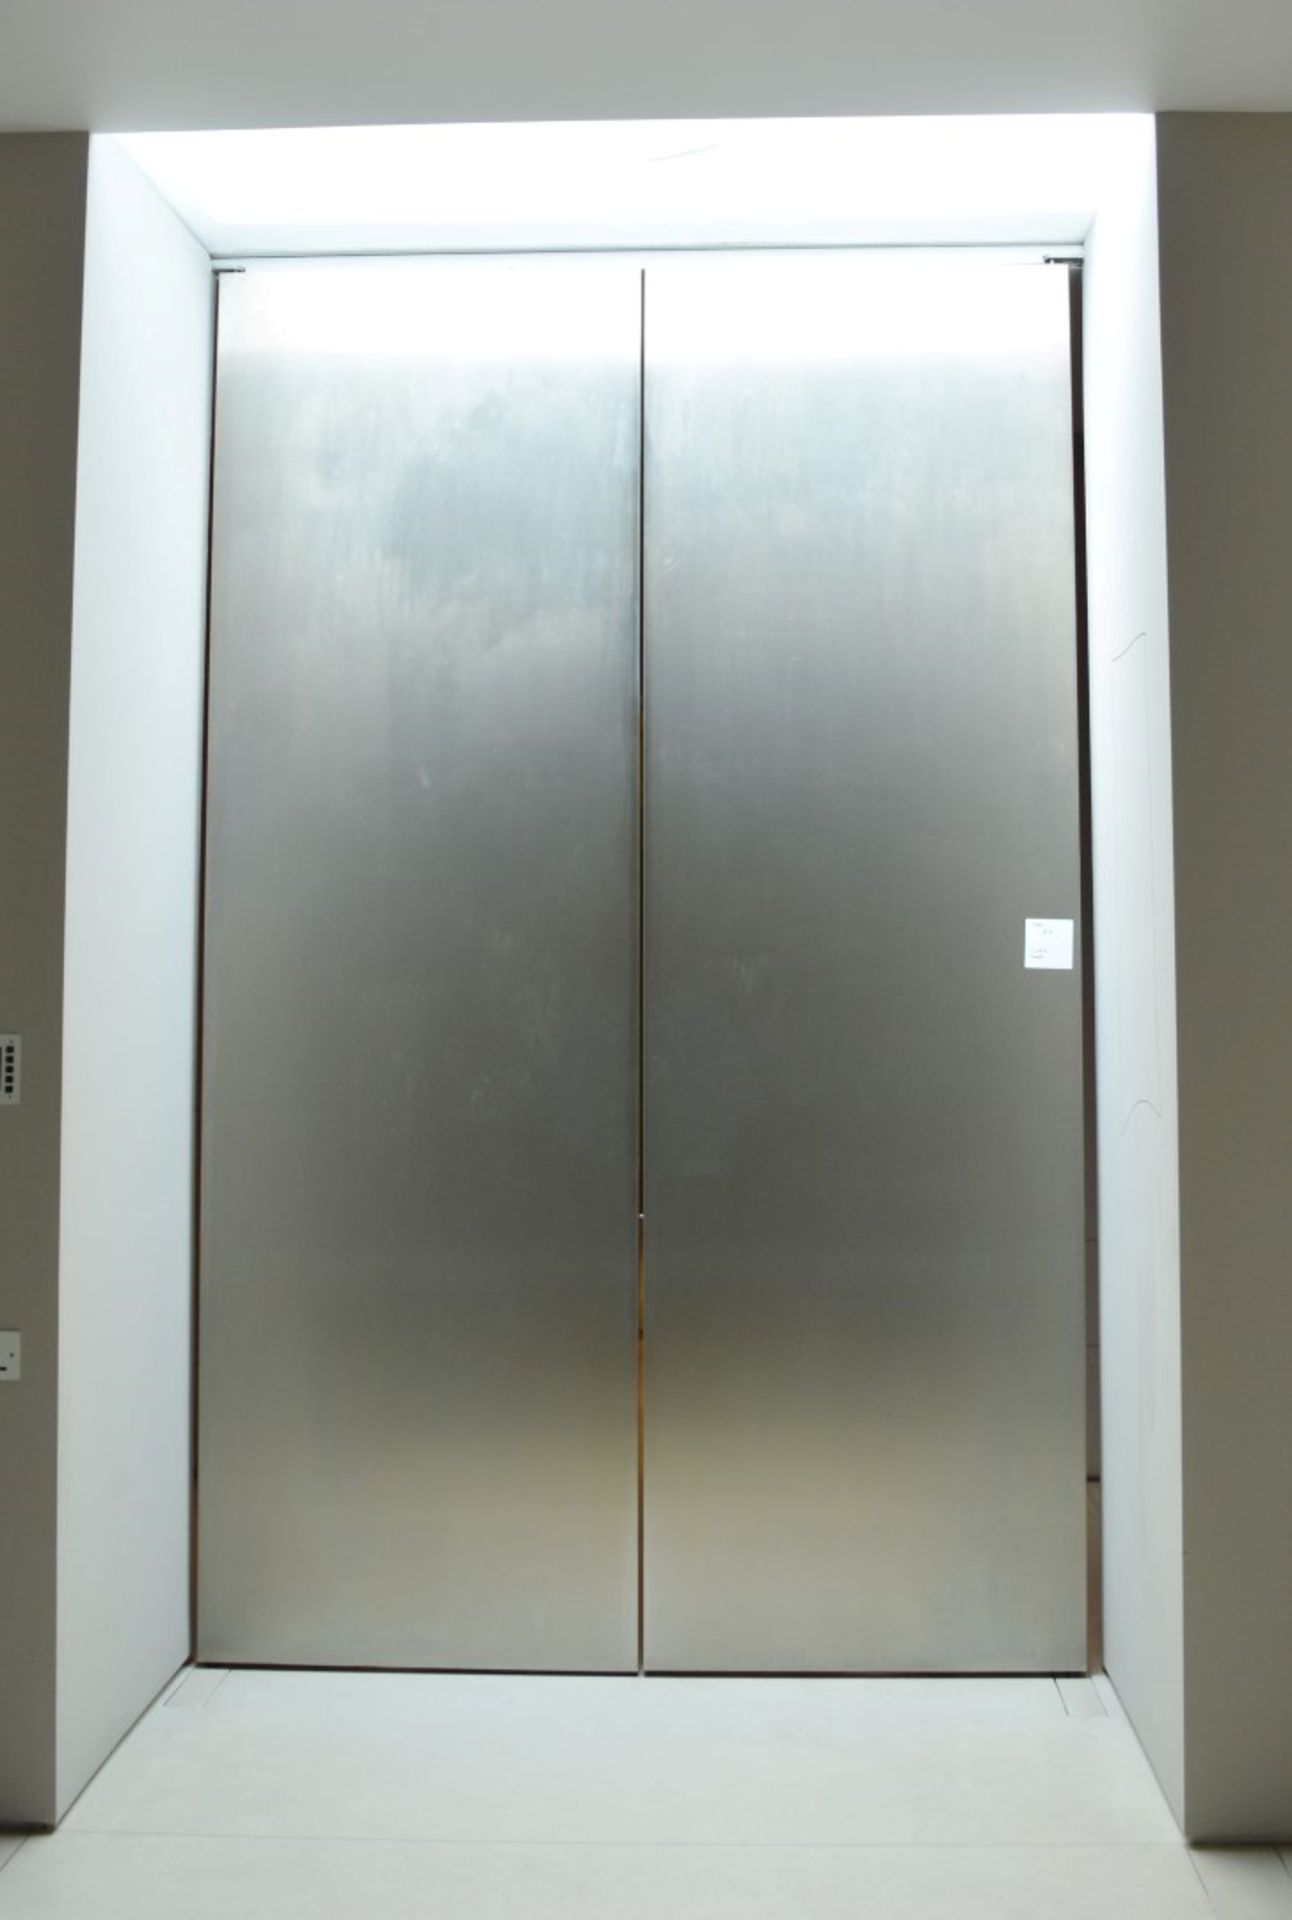 2 x Bespoke Internal Doors With Stainless Steel Finish - Pair of - Large Size - Ideal For Interior - Image 6 of 10